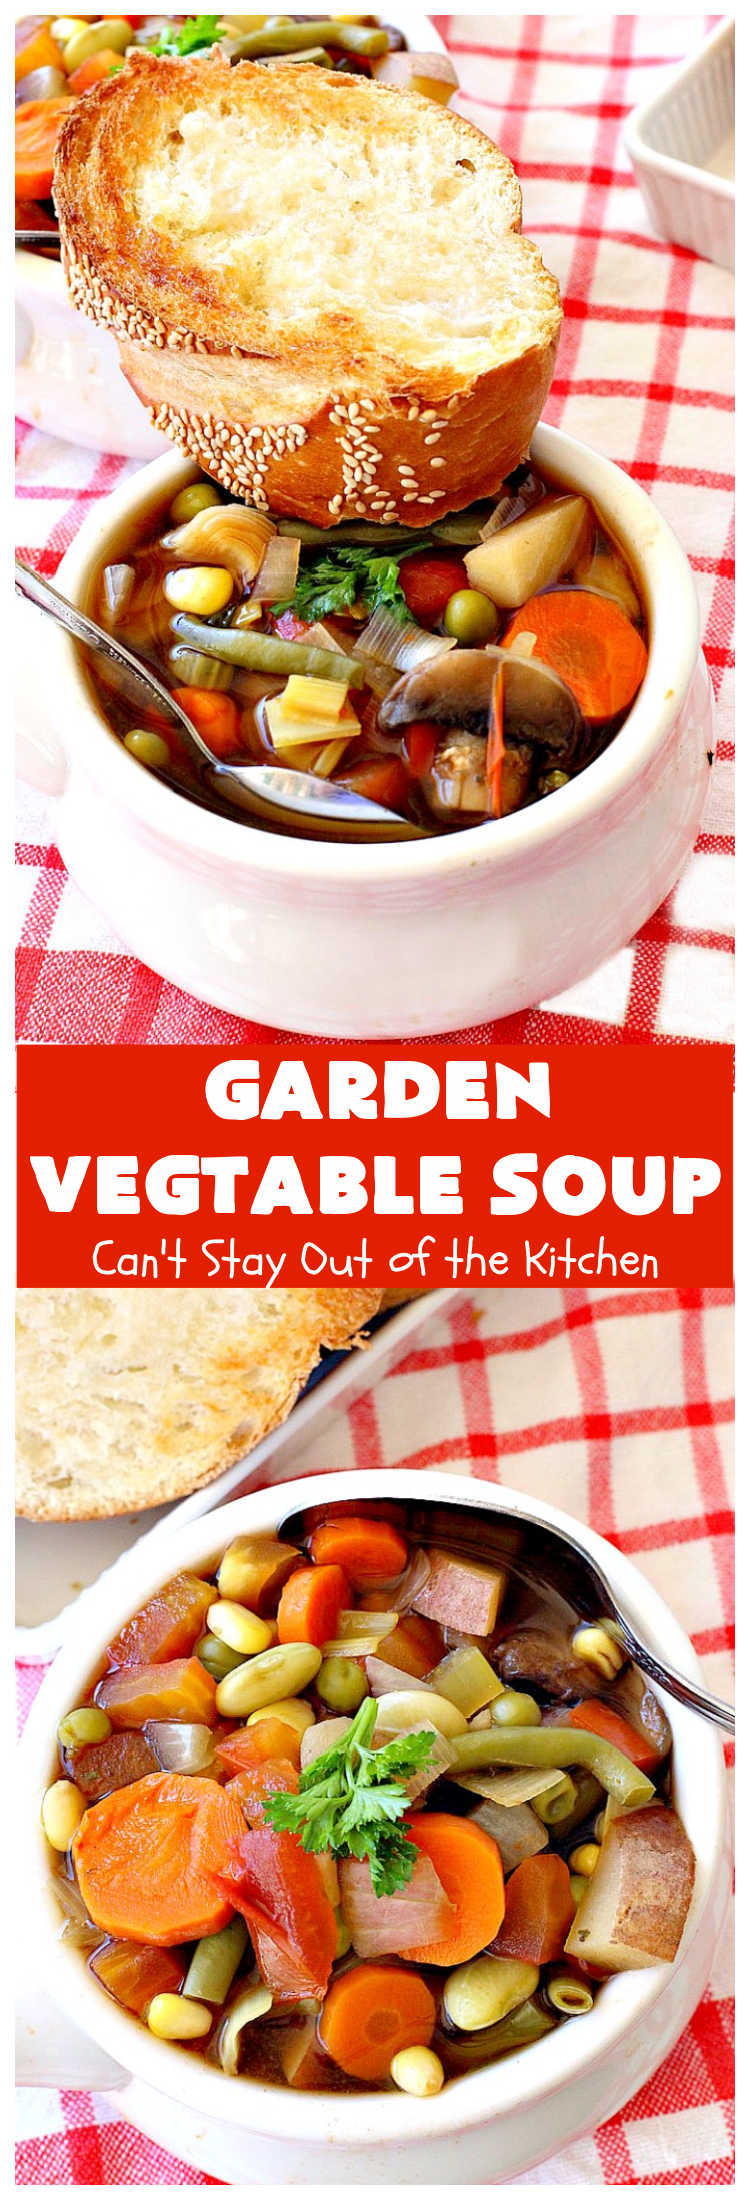 Garden Vegetable Soup | Can't Stay Out of the Kitchen | this savory & delicious #soup is chocked full of #veggies & so easy since it's made in the #crockpot. Enjoy a #LowCalorie comfort food meal with this tasty #recipe. #Healthy, #Clean Eating, #vegan & #GlutenFree. #MeatlessMondays #GardenVegetable Soup #SlowCooker #VegetableSoup #crockpot #EasyVegetableSoup